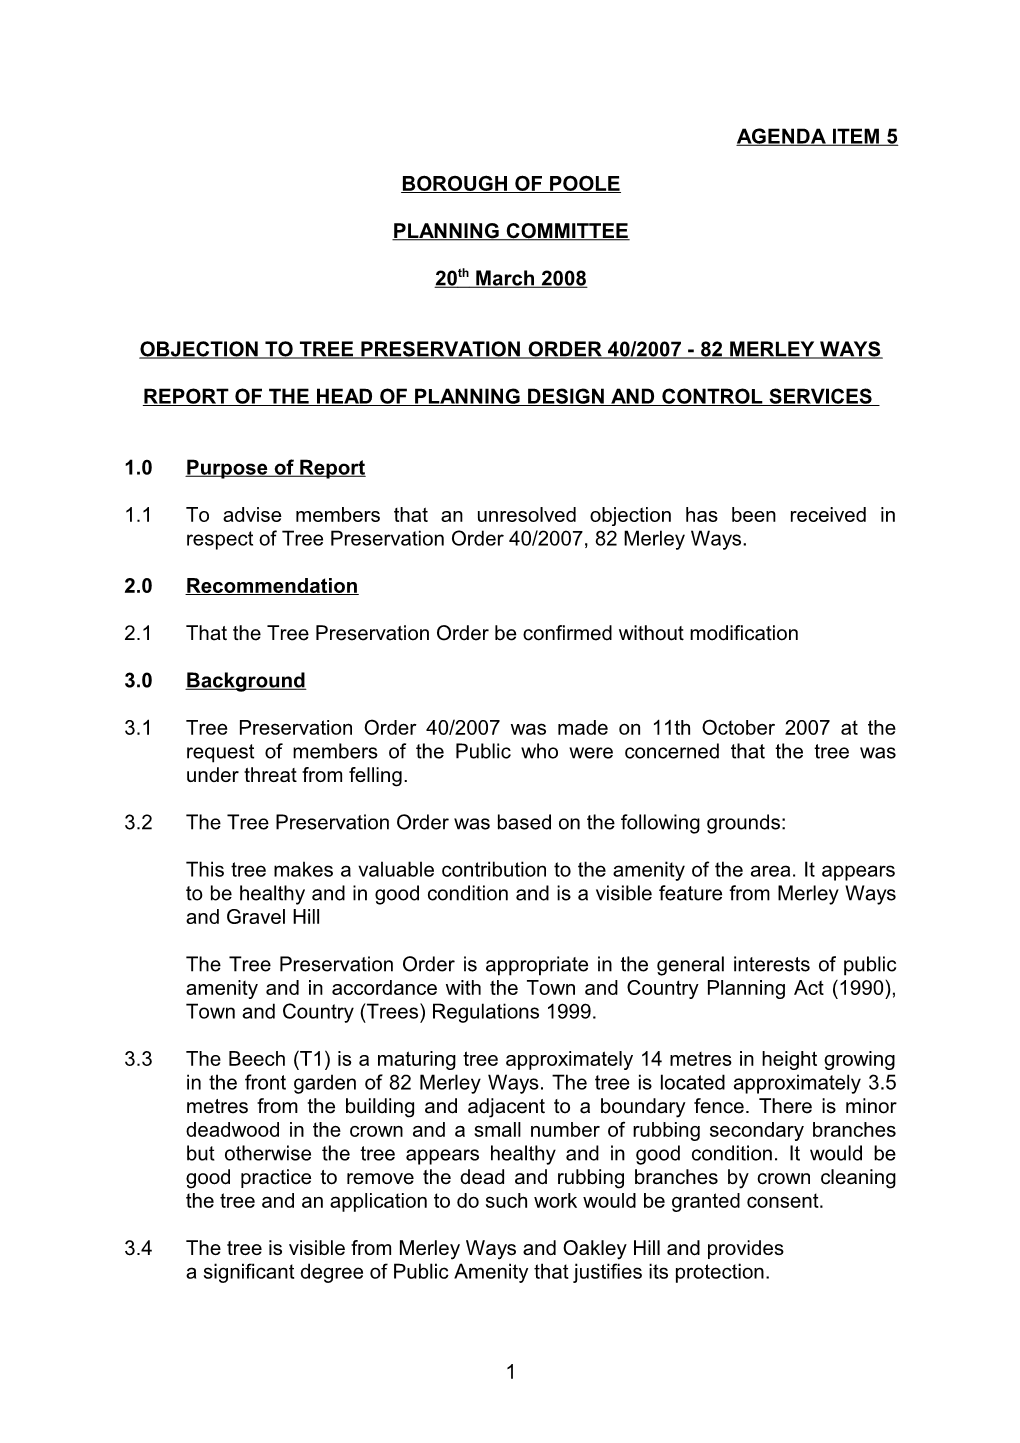 Objection to Tree Preservation Order 40/2007 - 82 Merley Ways